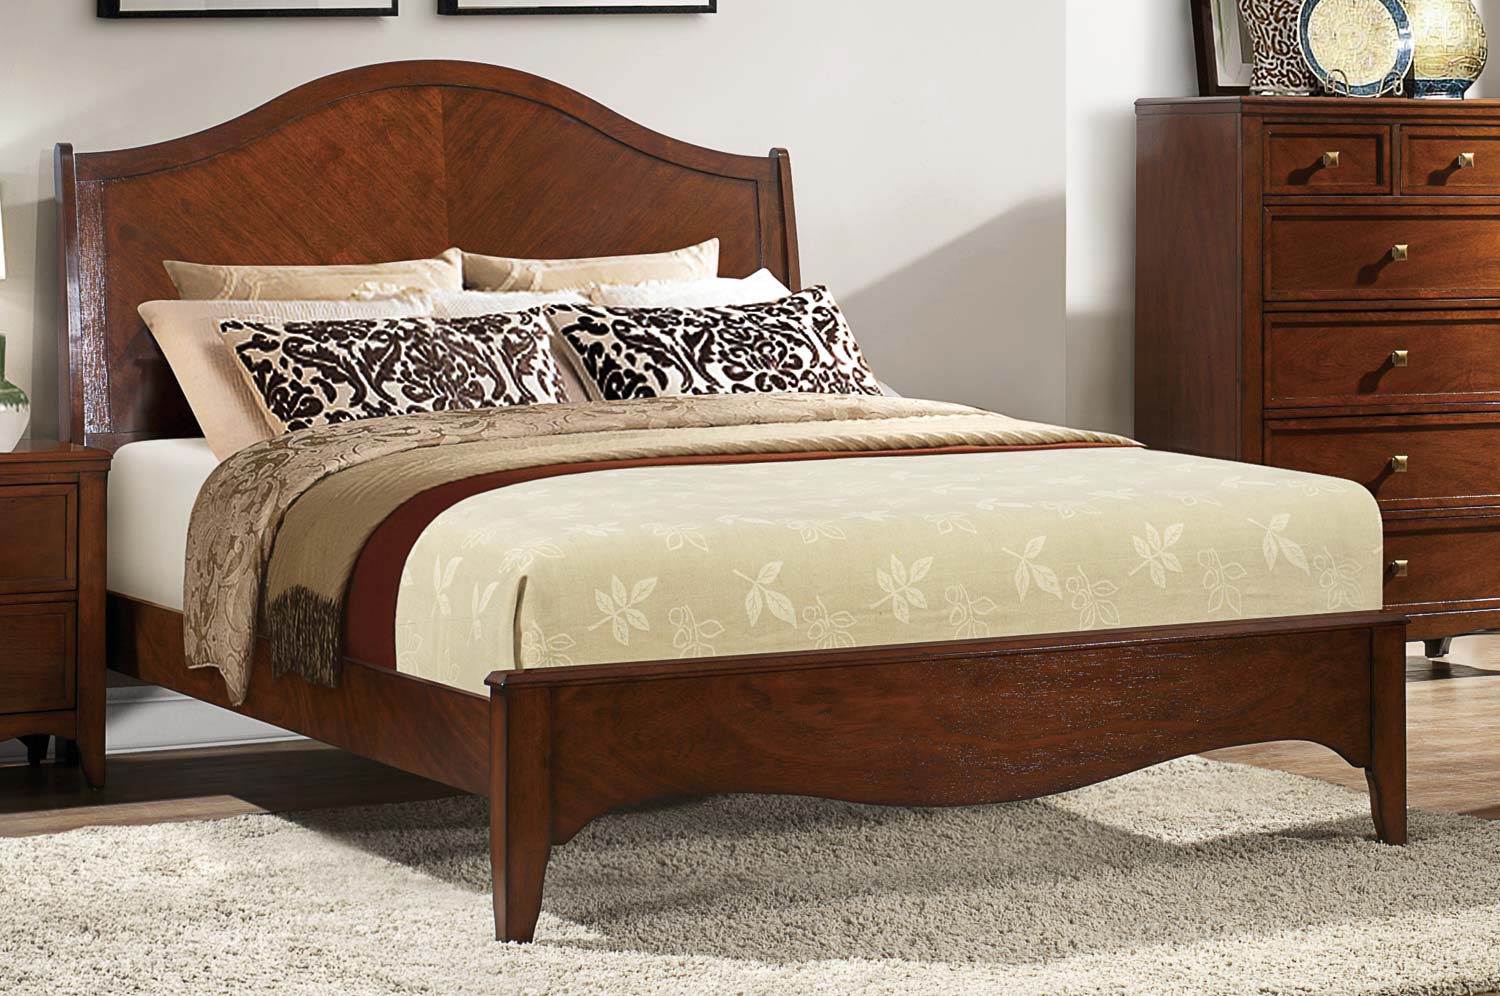 Homelegance Verity Low-Profile Bed - Cherry